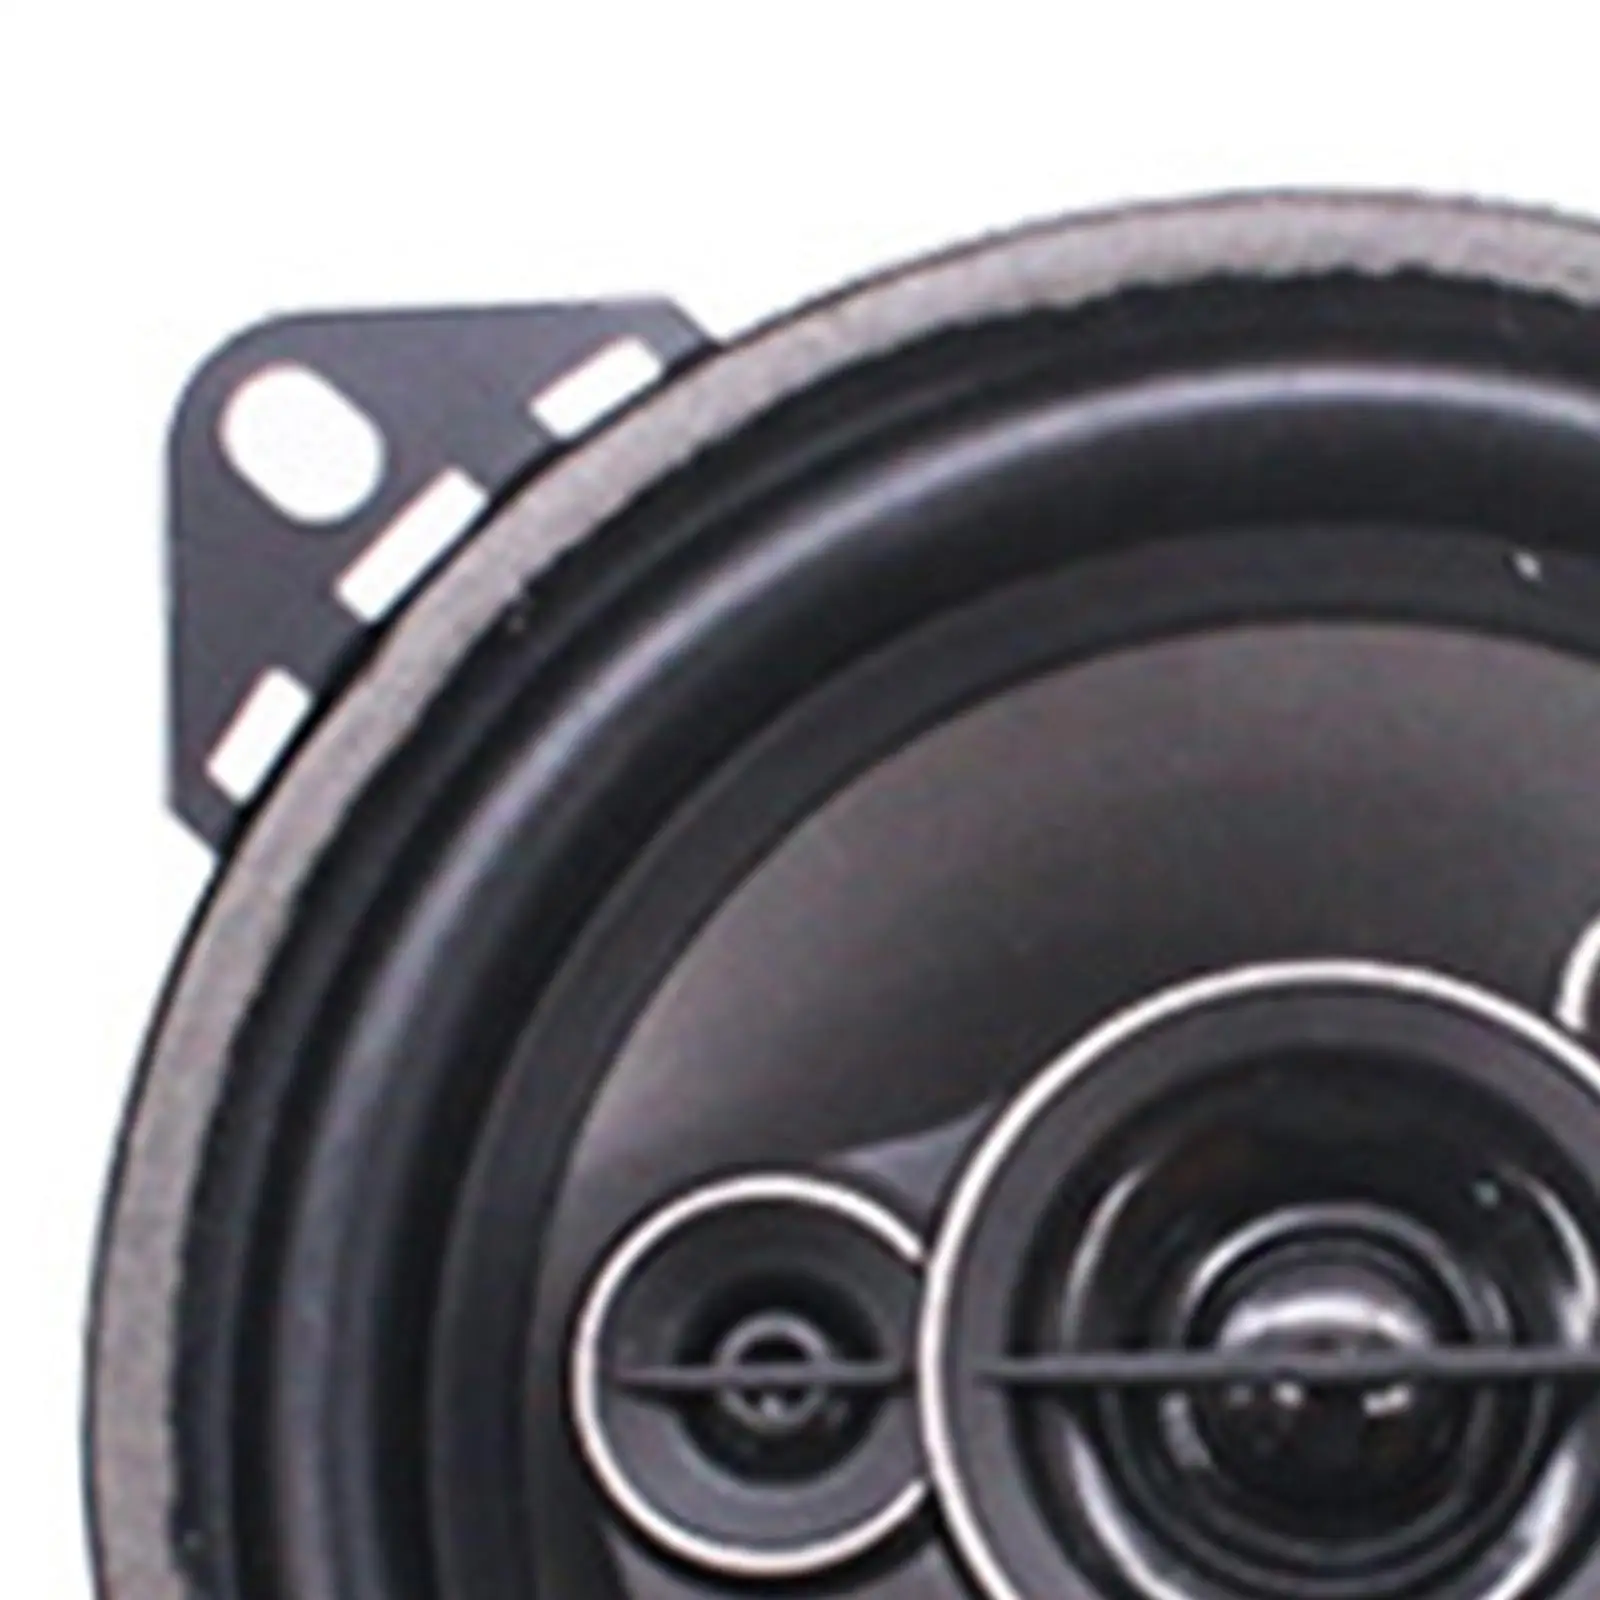 Car Audio Coaxial Speaker Stereo Car Loudspeaker Car Audio Speaker for Car Audio System Replacement Accessories Spare Parts